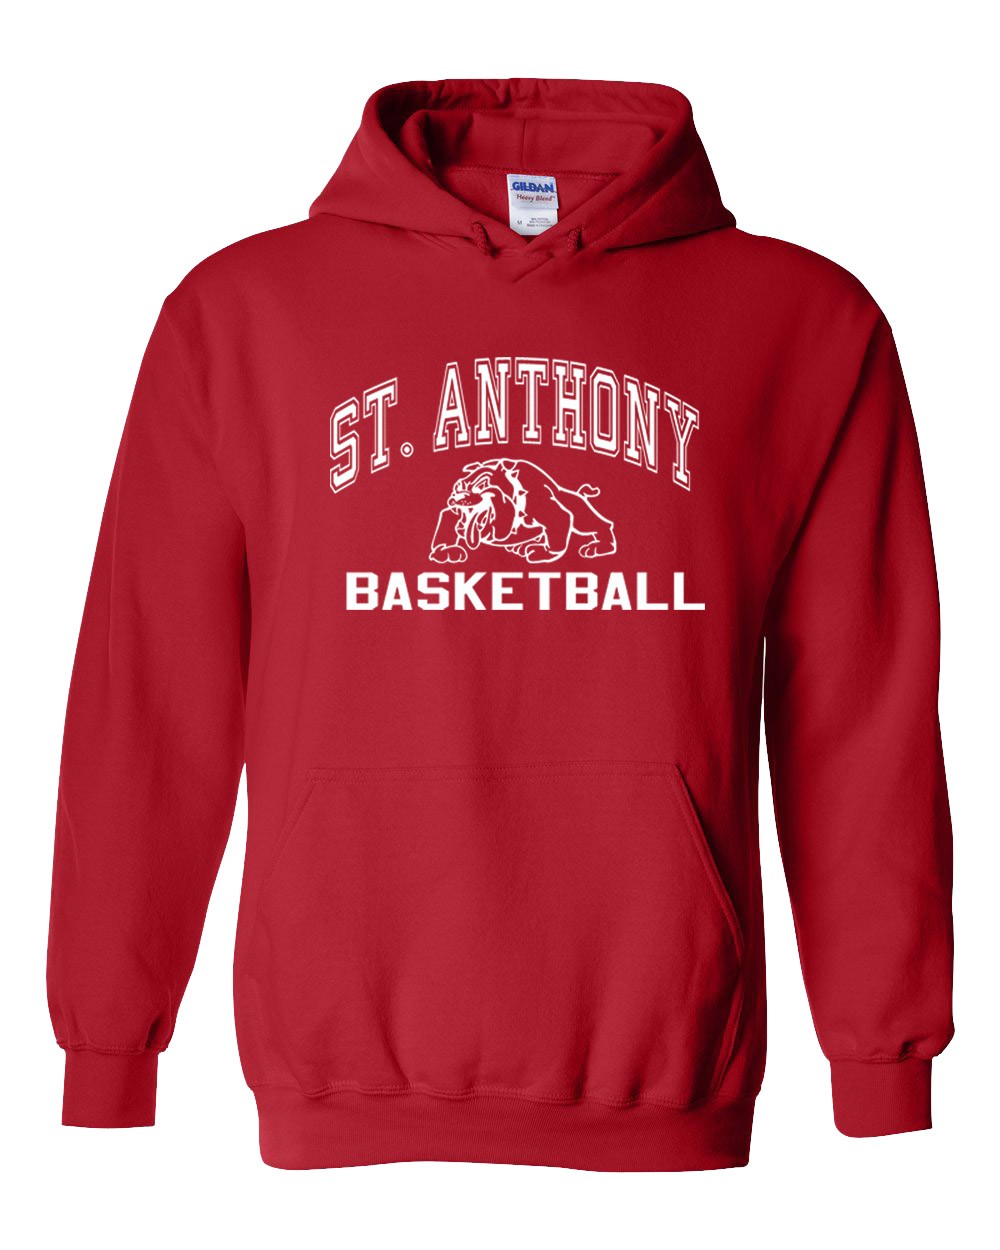 SAS Red Basketball Team Hoodie w/Logo & Name/Number - Please Allow 2-3 Weeks For Delivery 